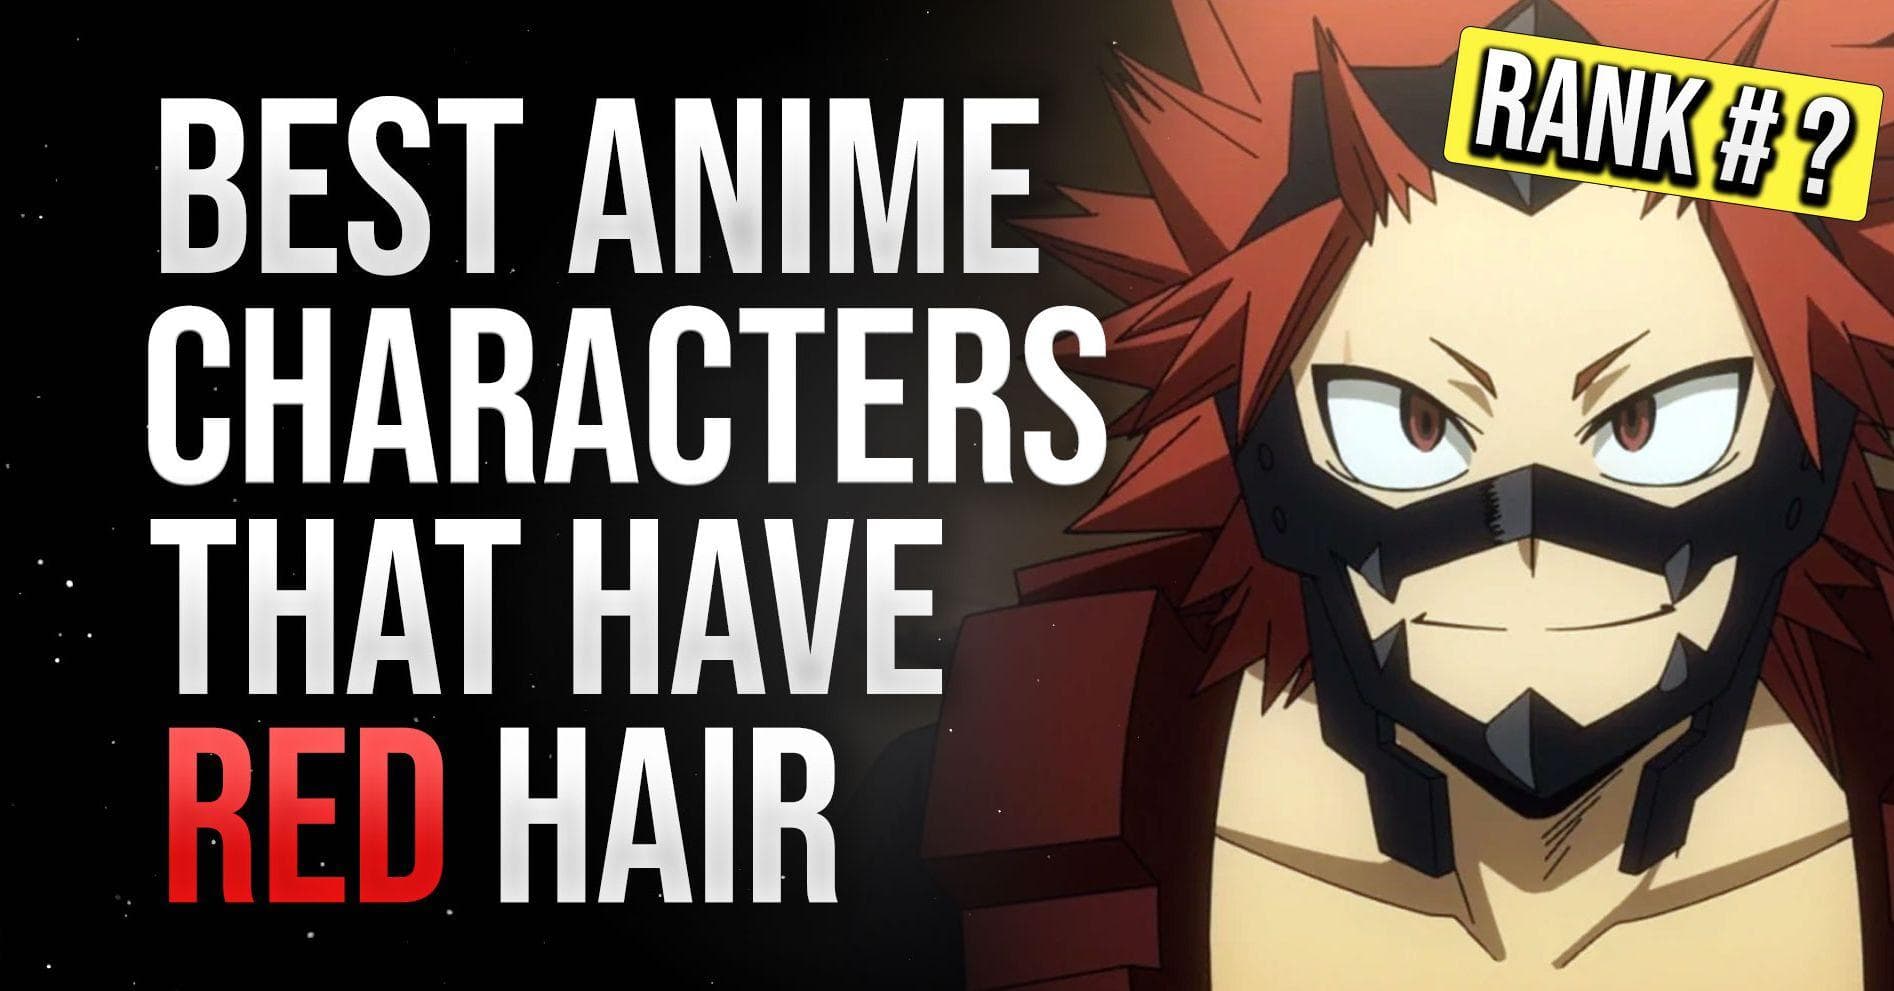 50+ Cool Anime Names for Game Characters